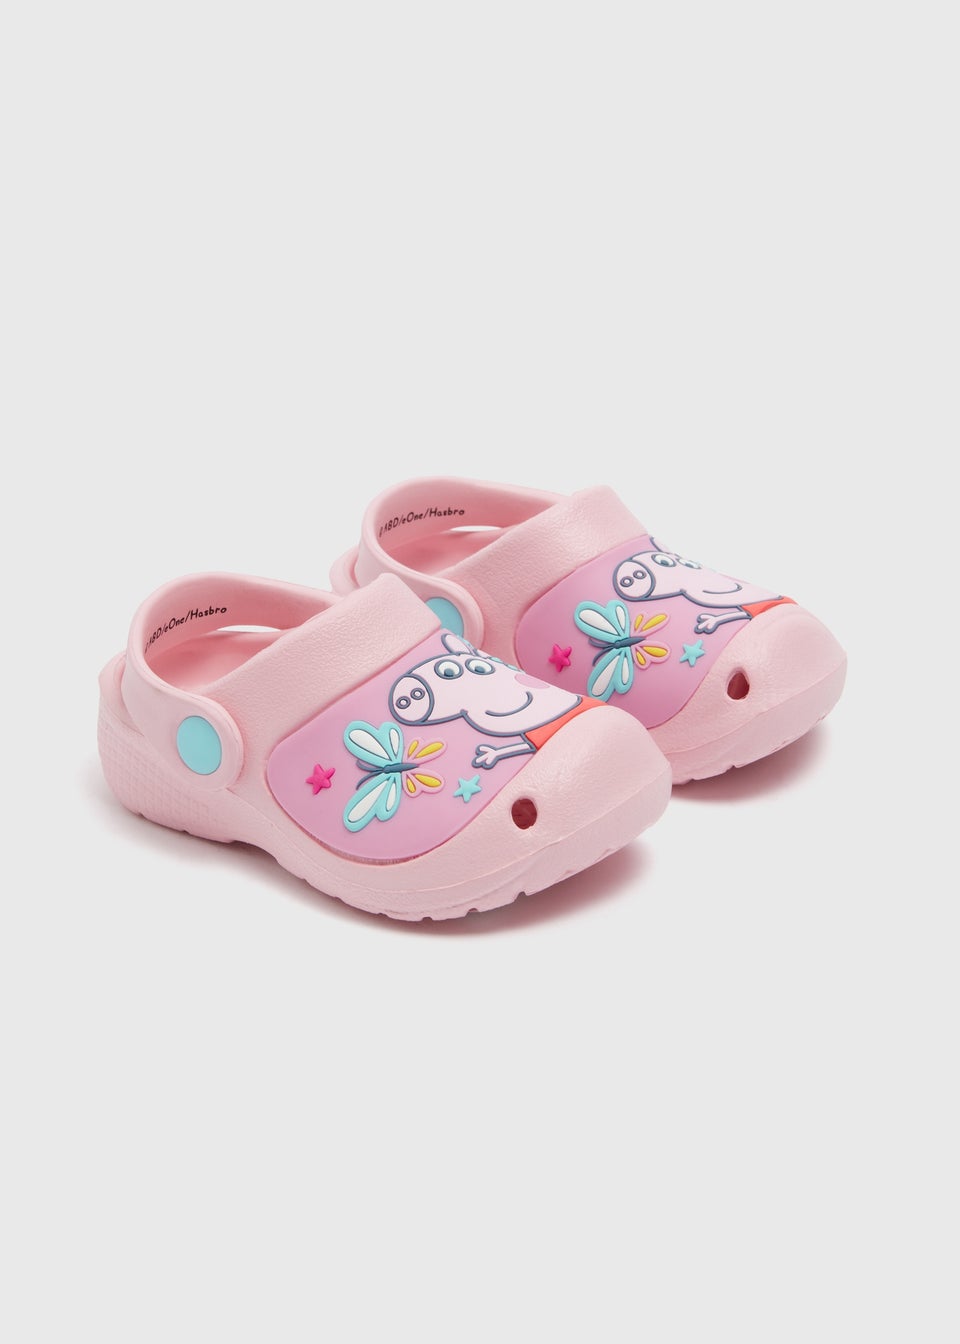 Peppa Pig Girls Pink Clogs (Younger 4-9)